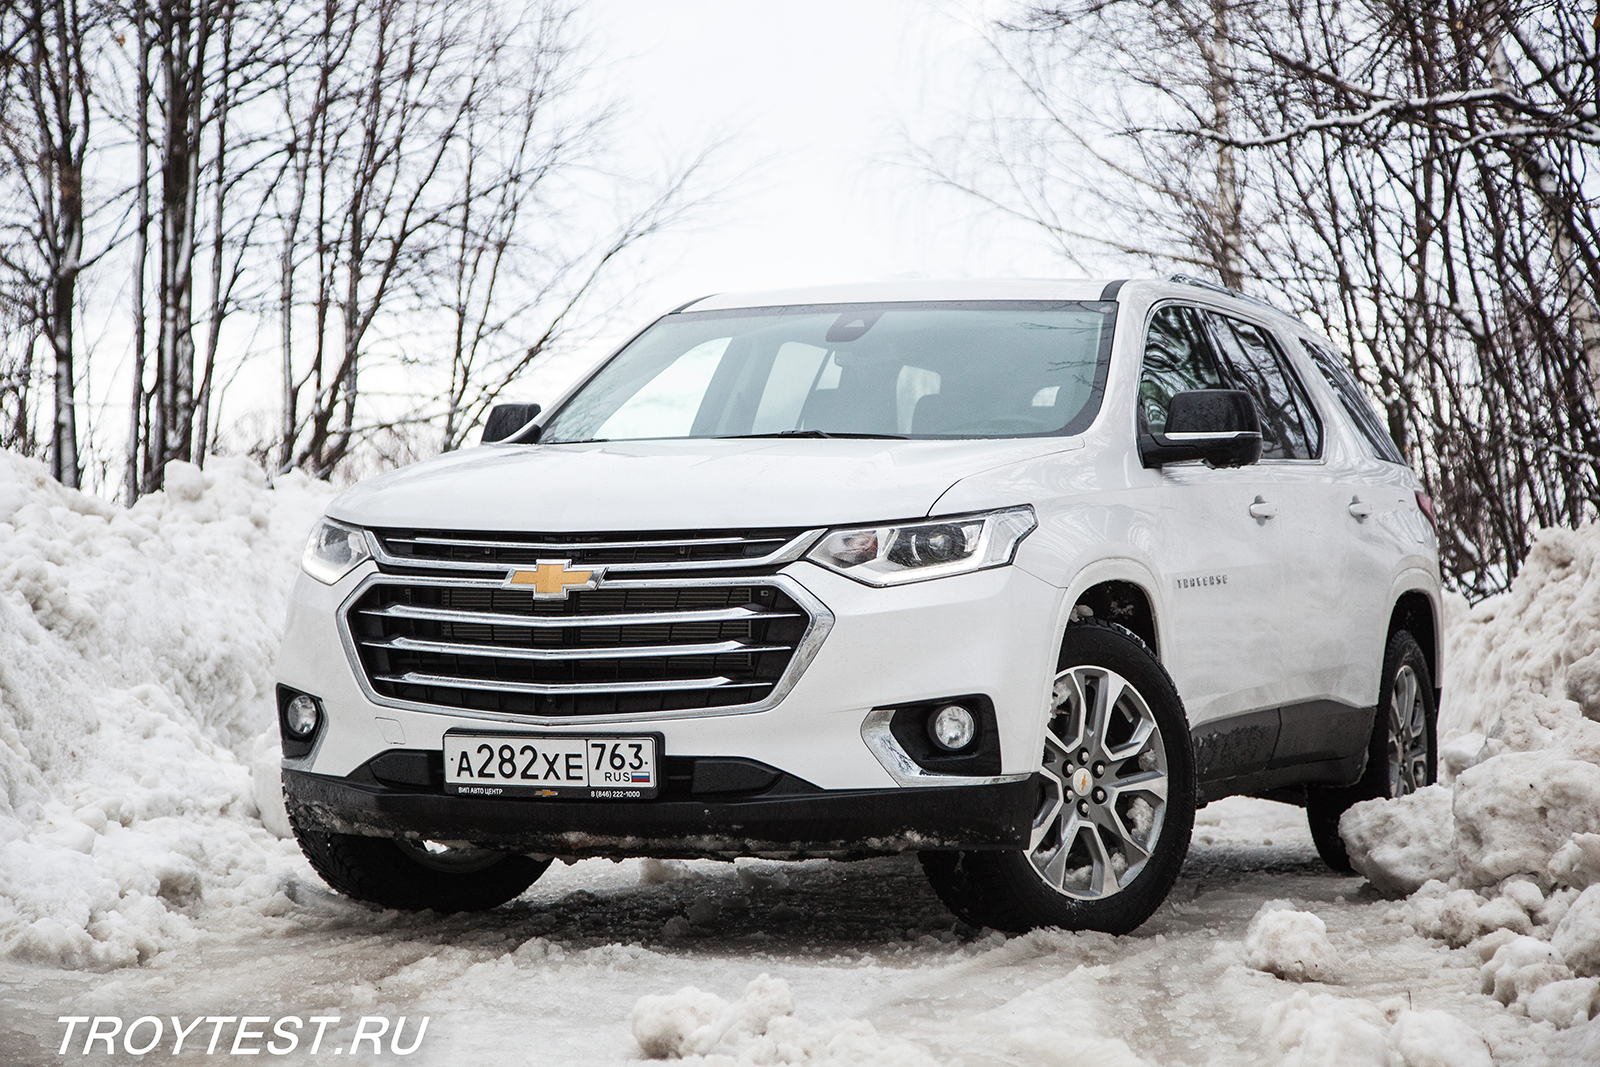 chevrolet, traverse, troytest, andrey troy, review, chevy, suv, crossover, usa